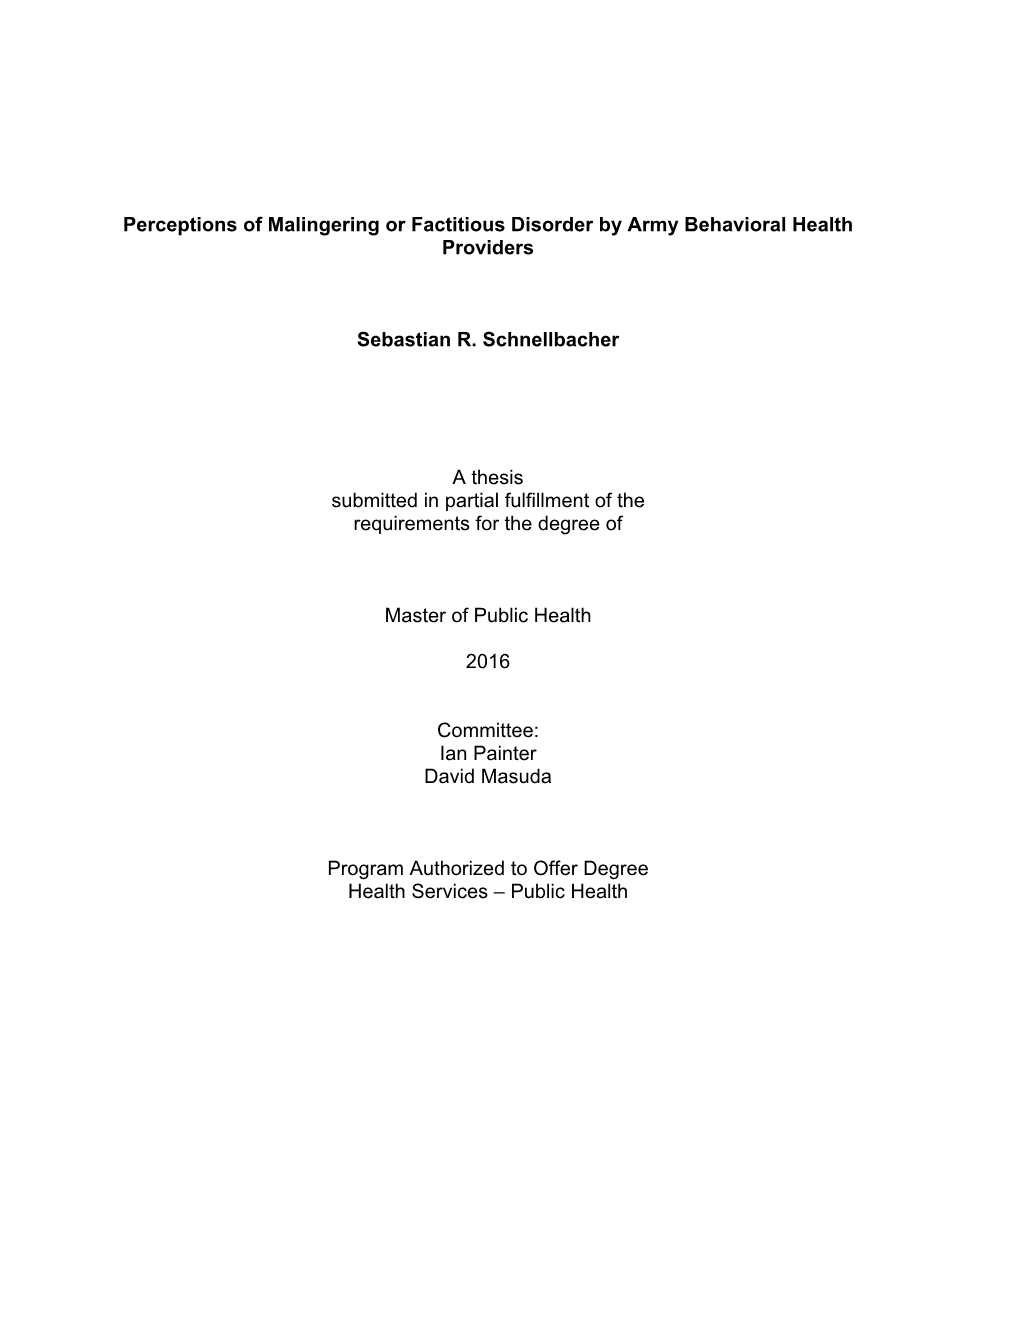 Perceptions of Malingering Or Factitious Disorder by Army Behavioral Health Providers